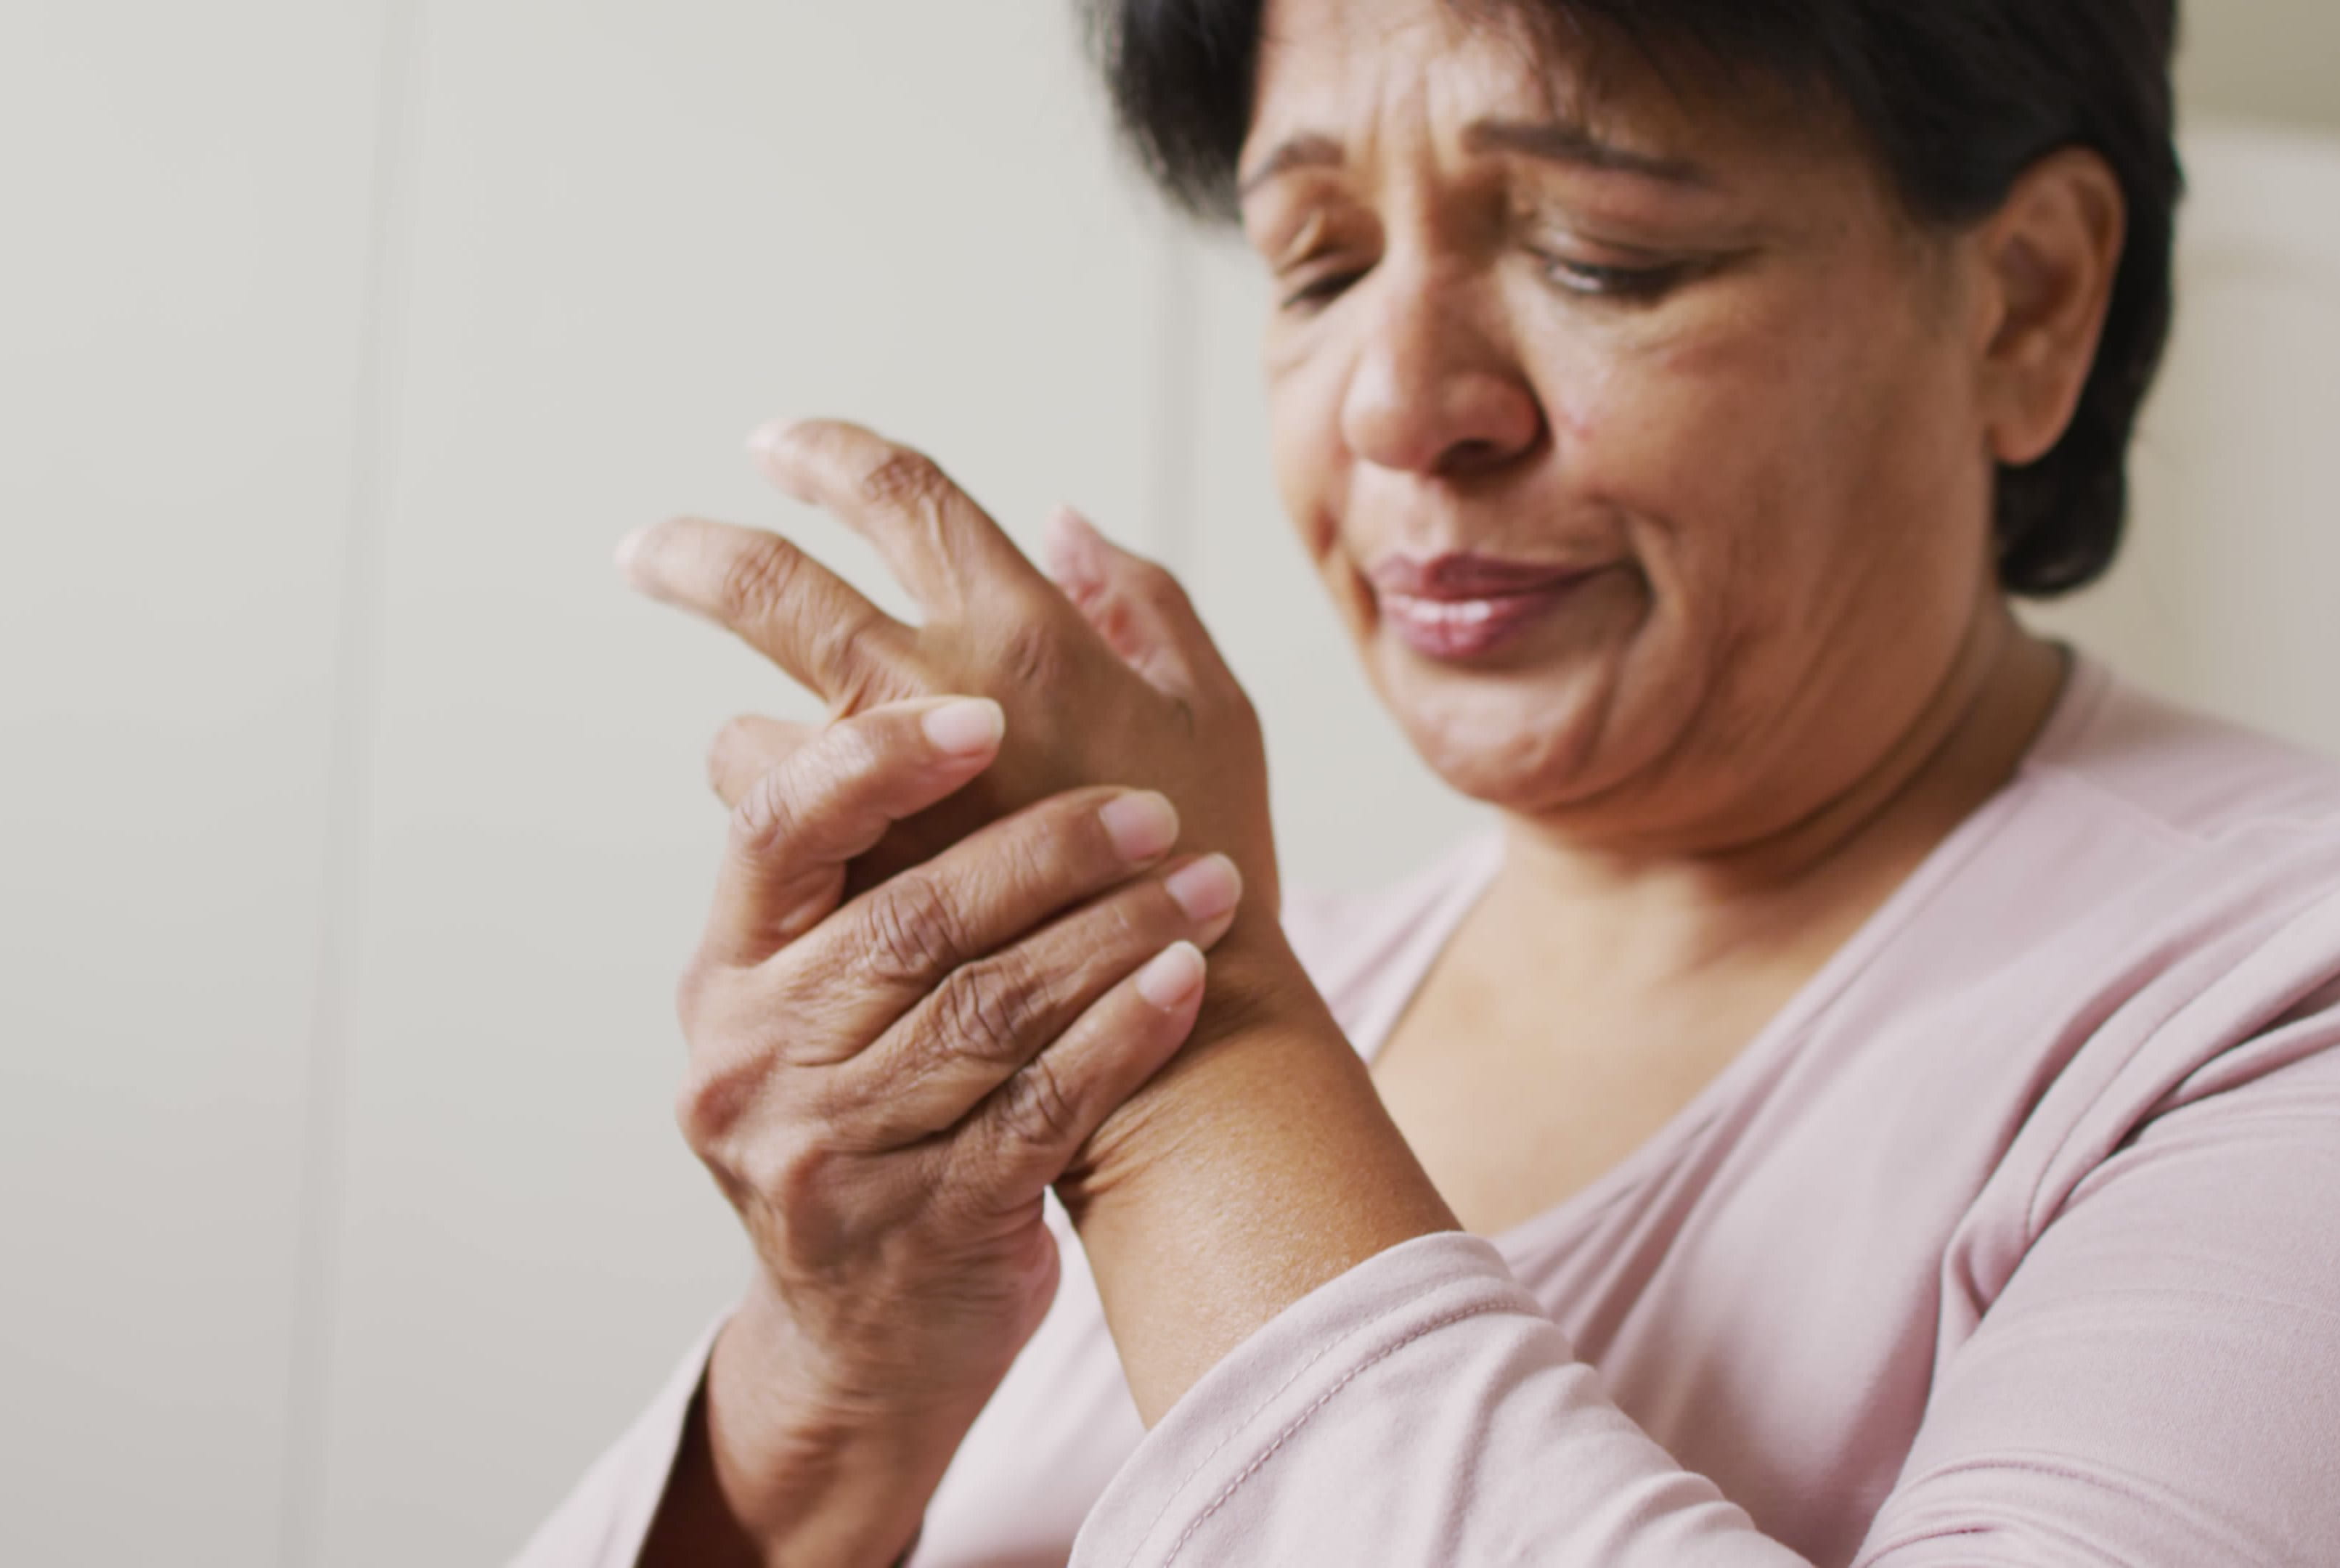 Woman holding her hand in pain